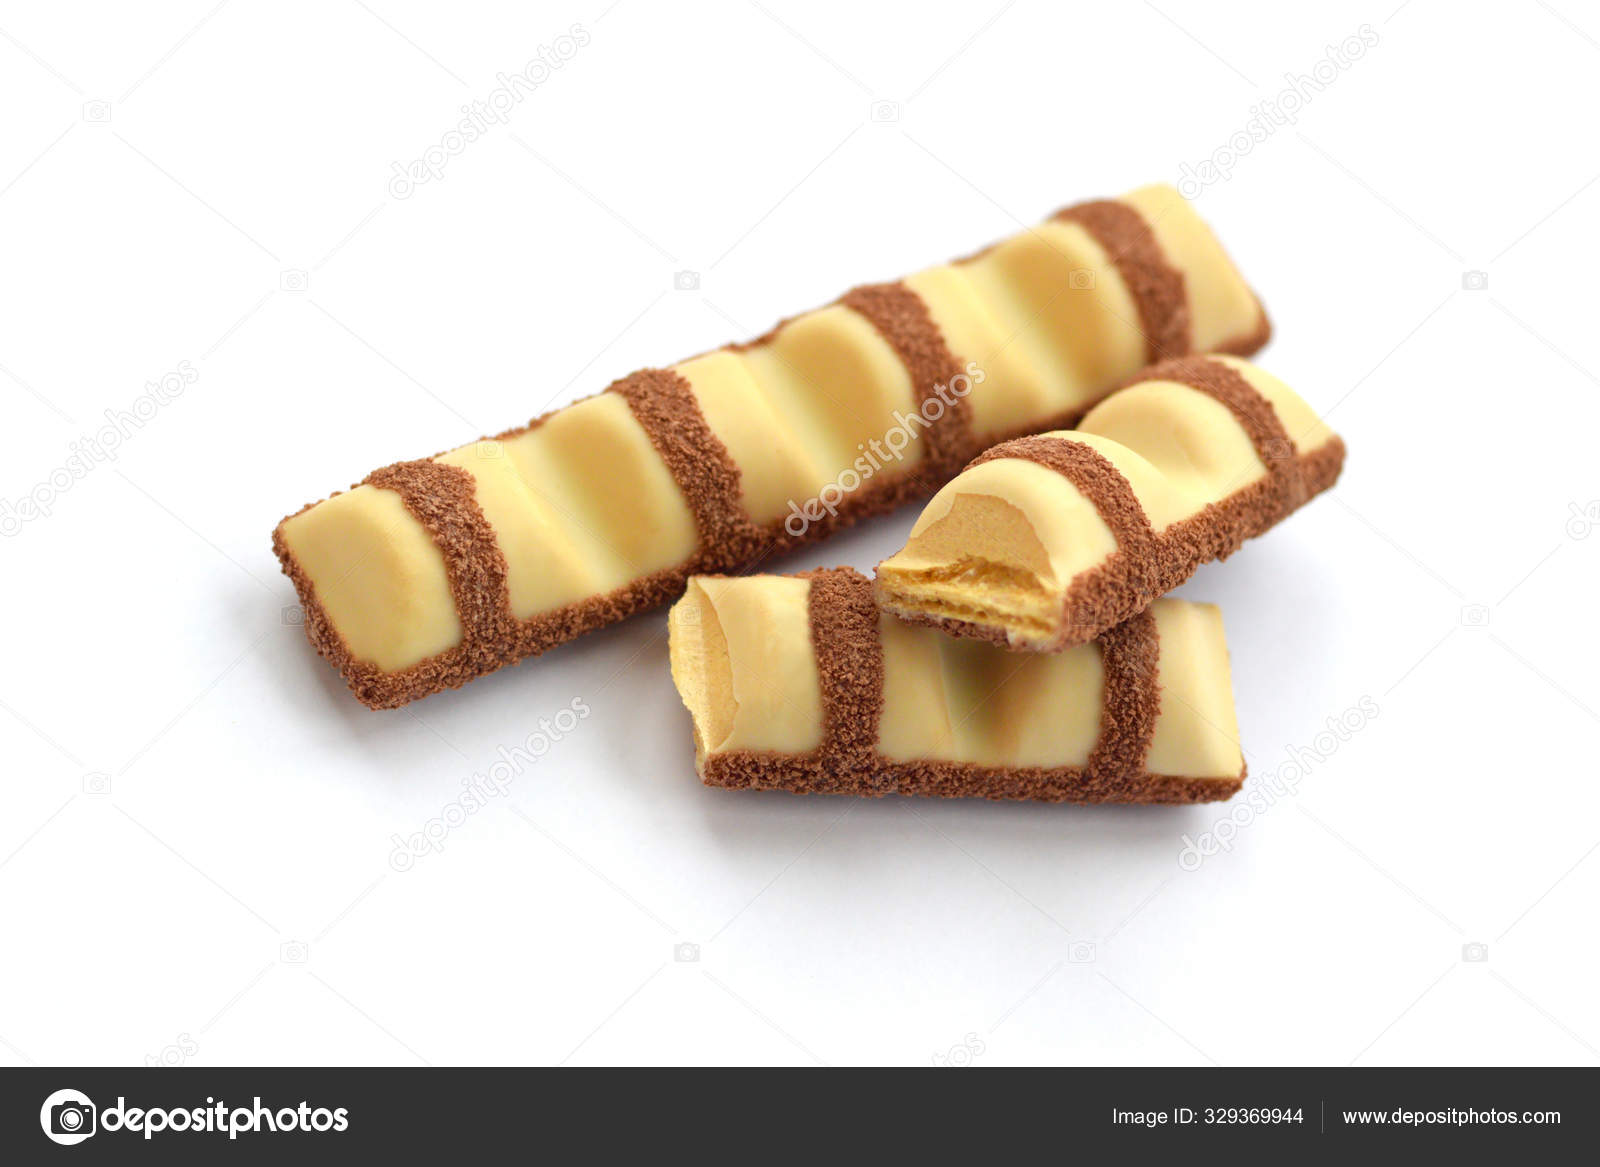 Kinder Bueno Chocolate Candy Bar – Mehaniq On Photo Background. © Kinder Bueno White Ferrero by #329369944 Italian Editorial Confectionery Stock Manufacturer